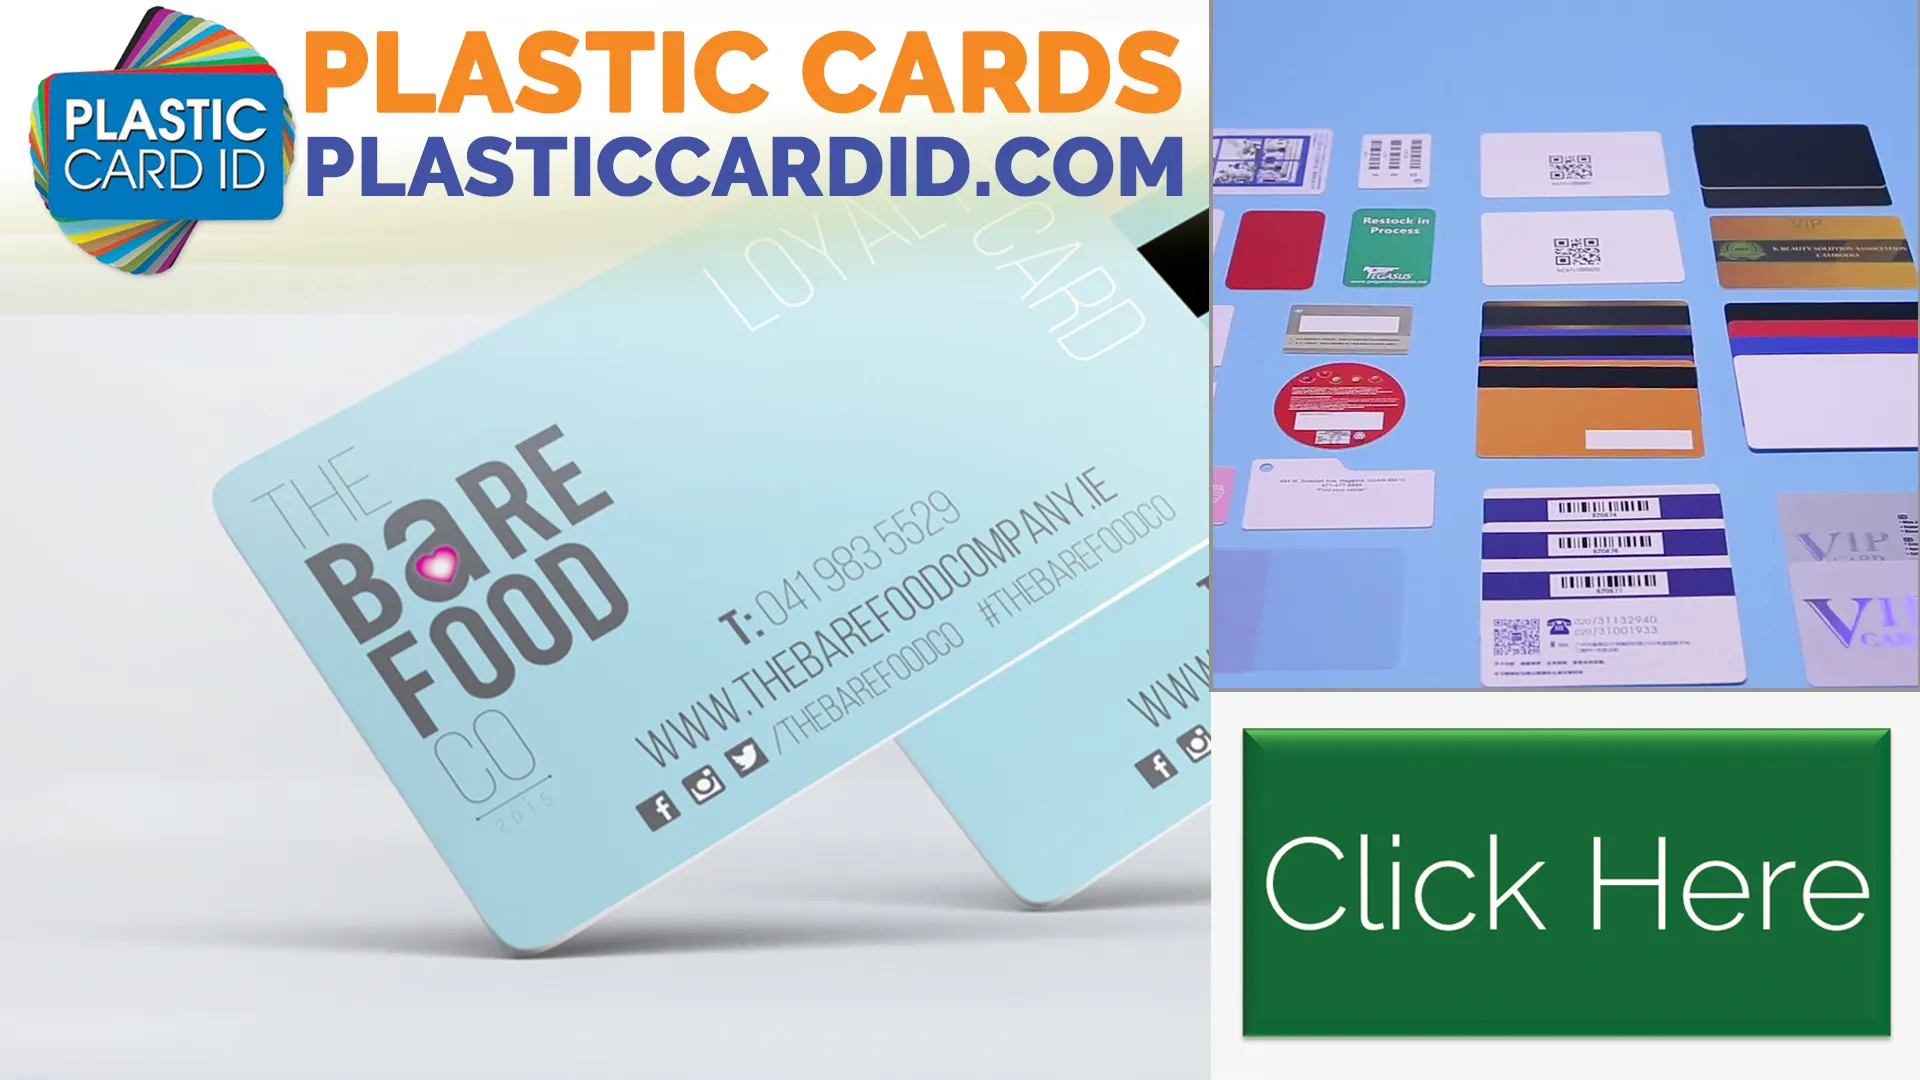 Welcome to the World of Secure and Stylish Plastic Cards